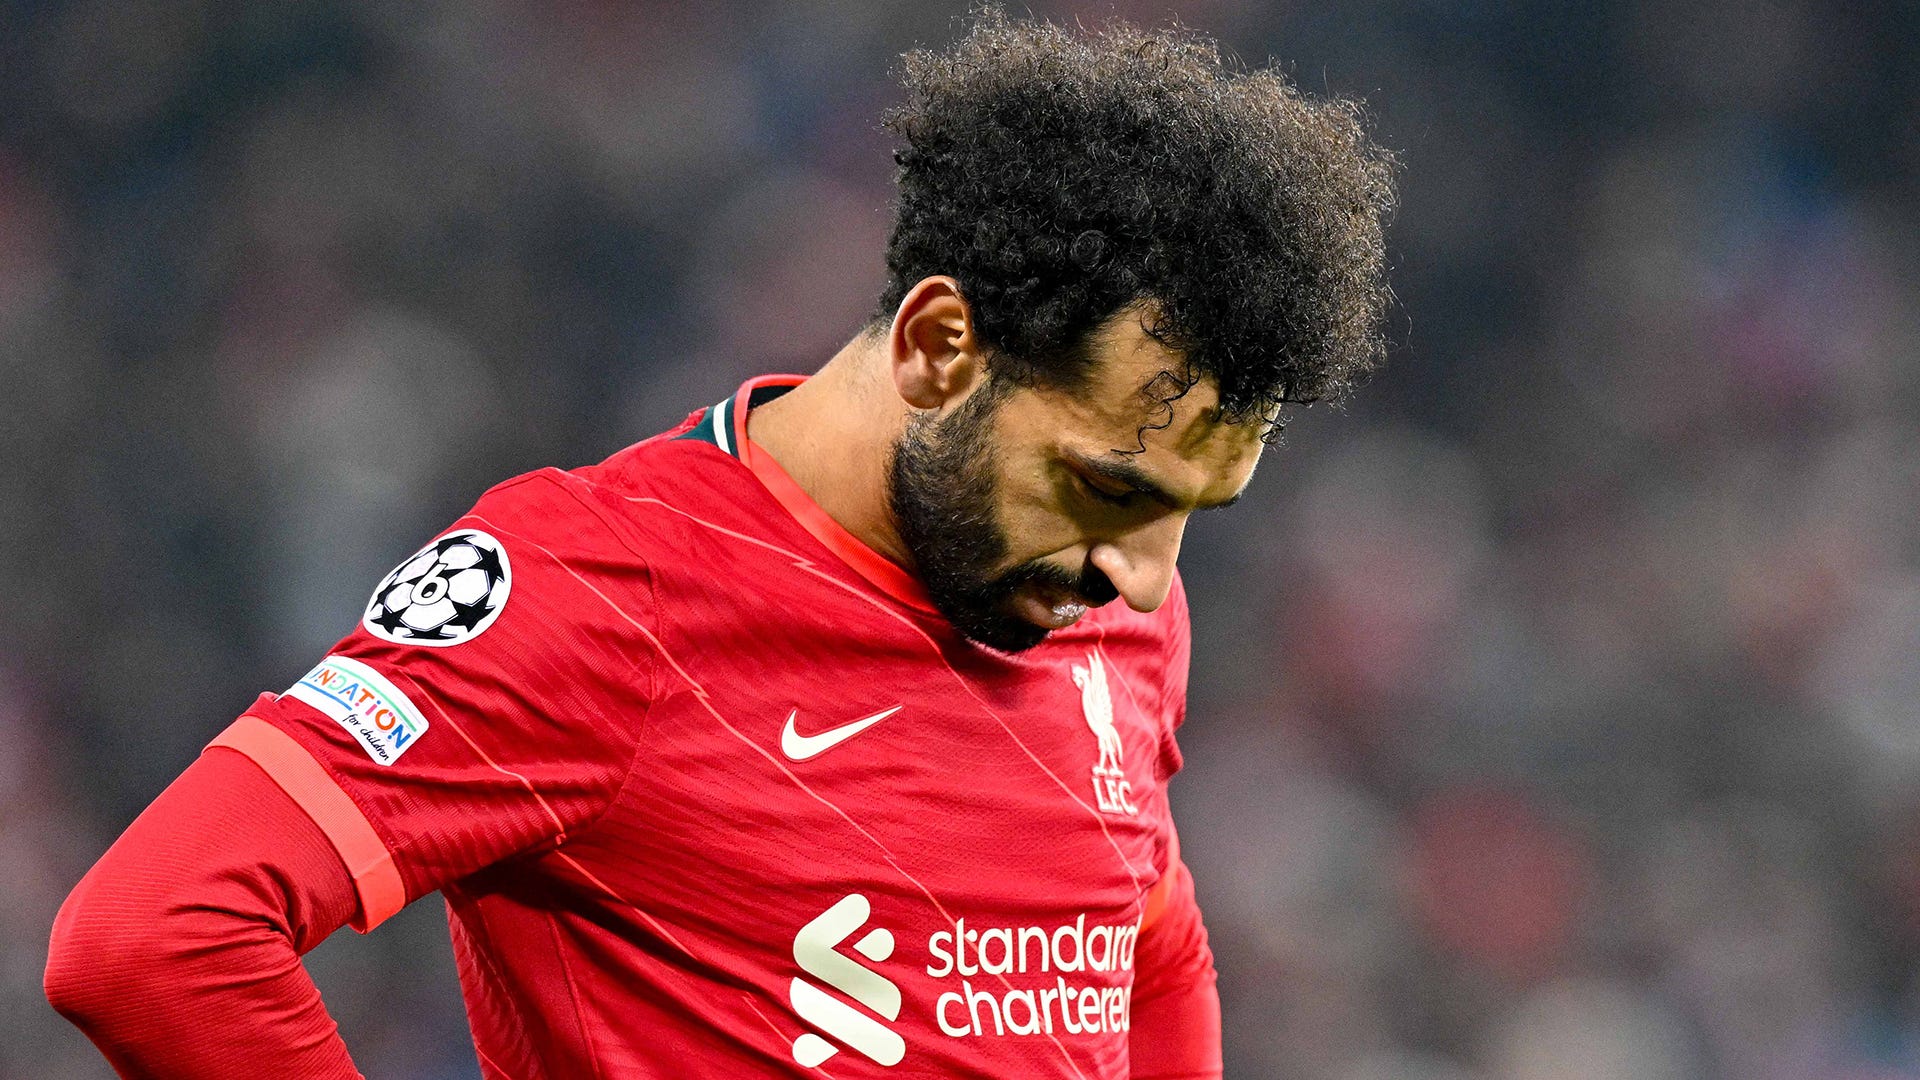 Salah played with injury in Champions League final' - Egypt's team